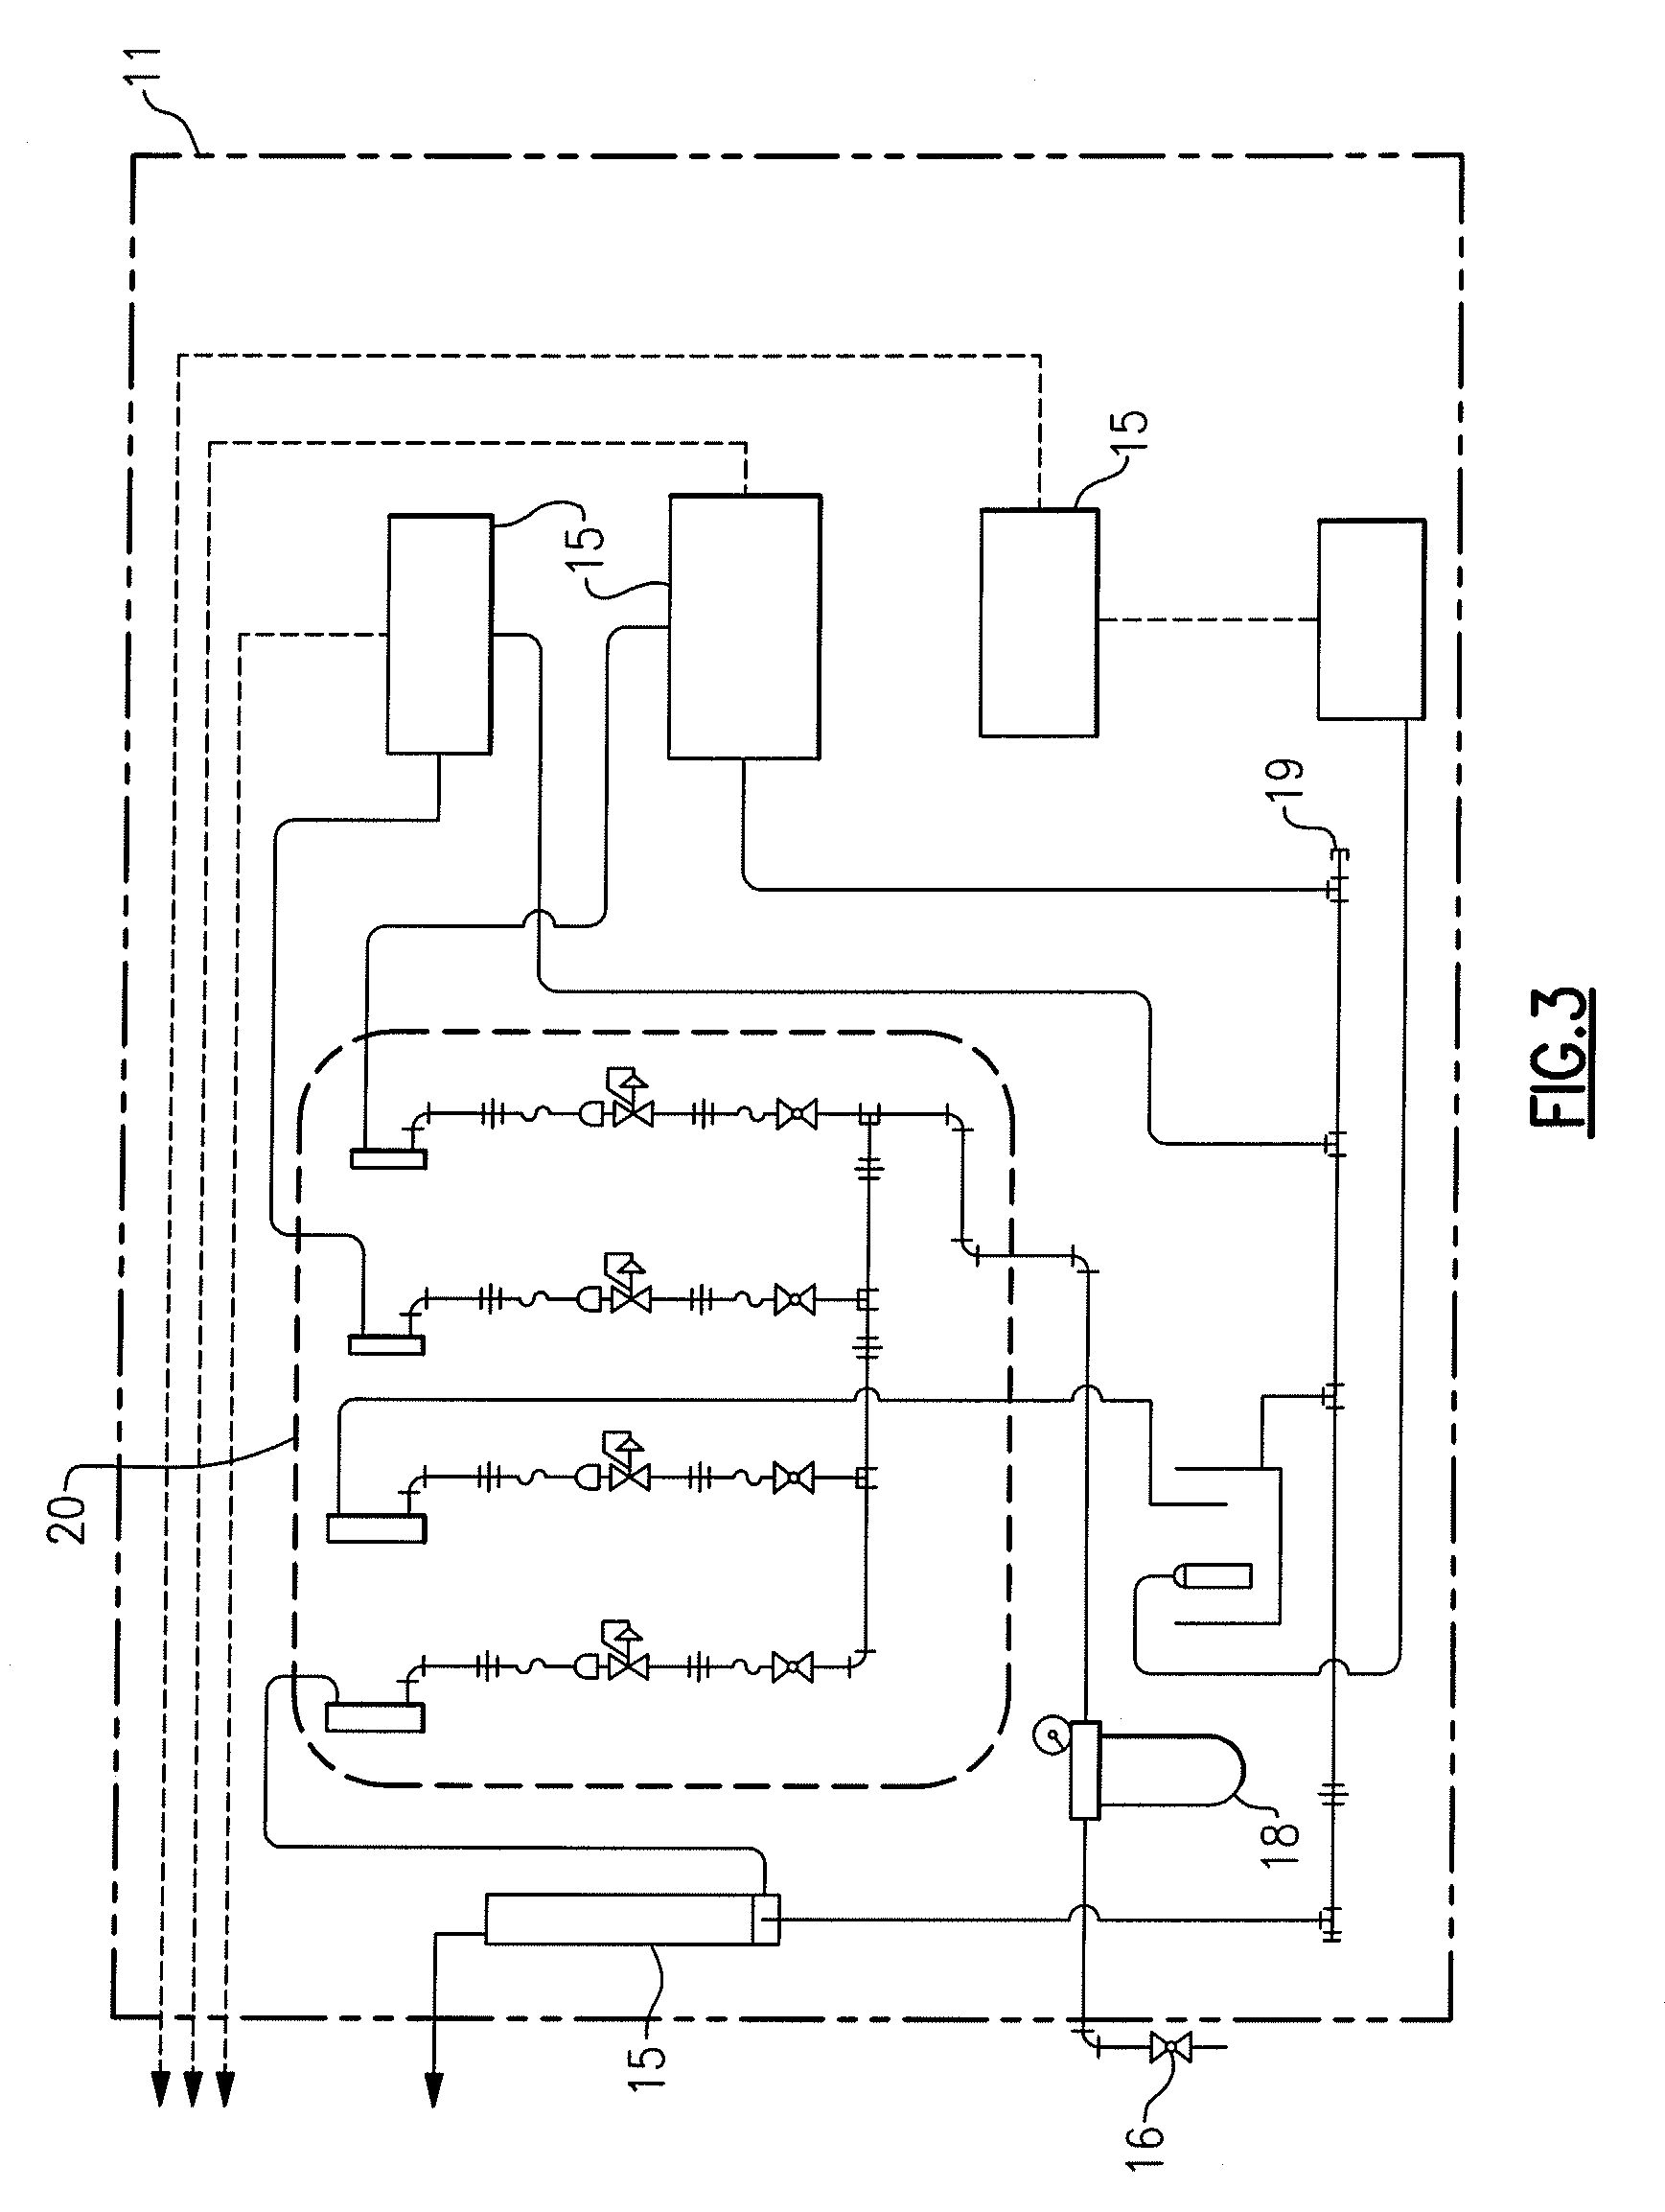 System for monitoring quality of water system